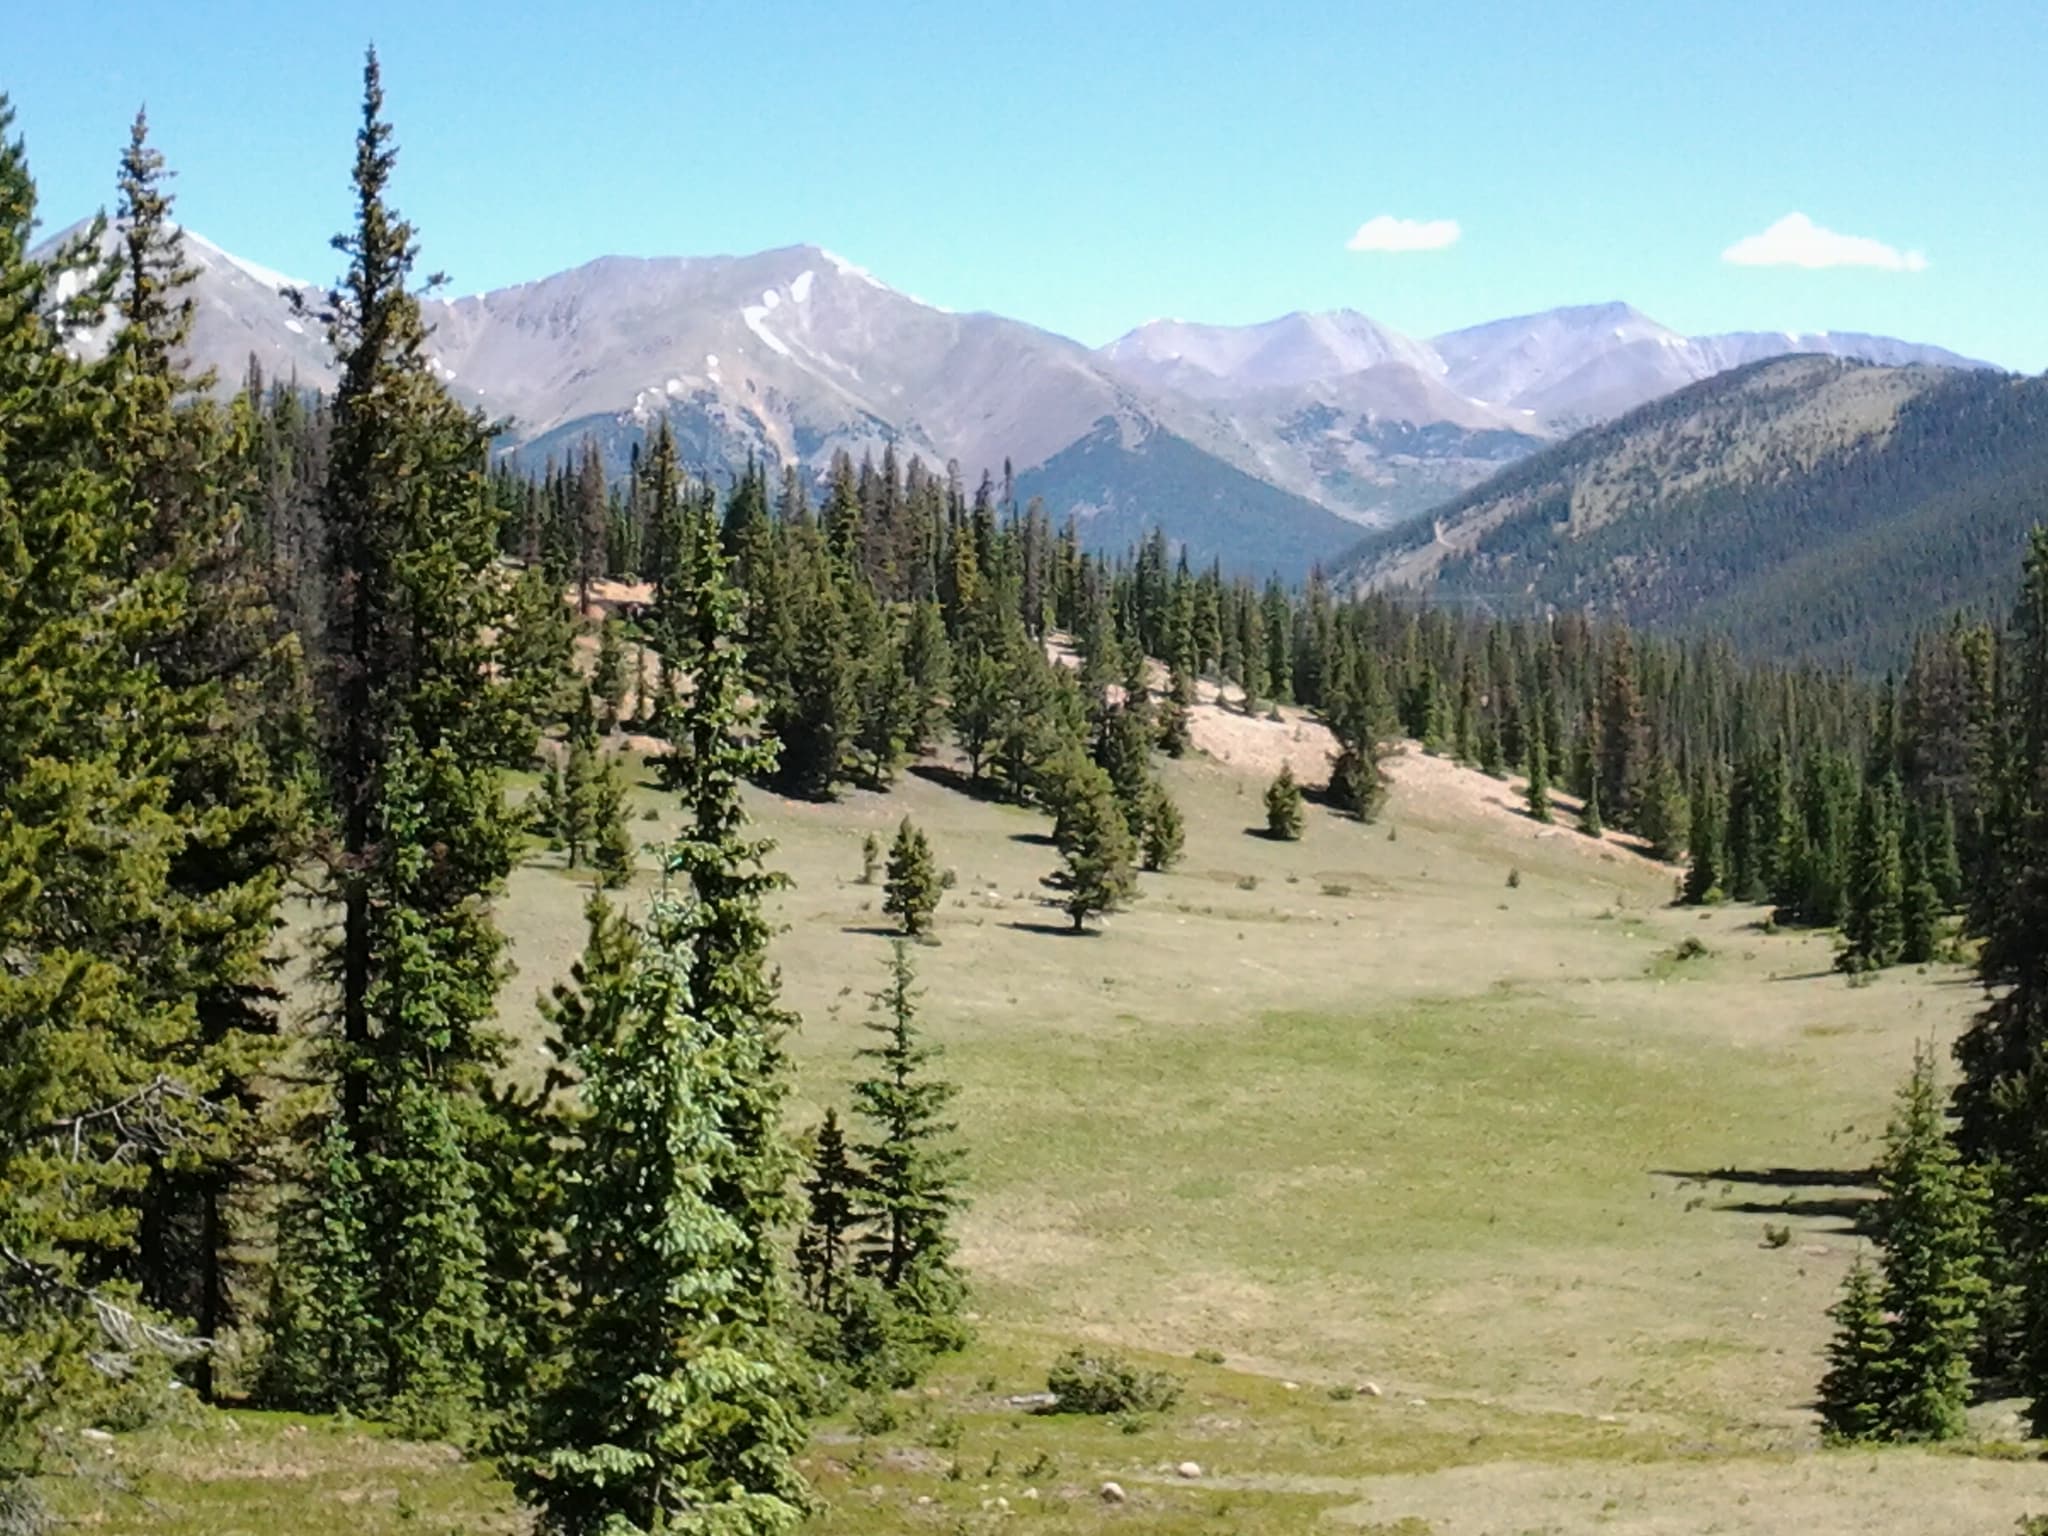 Big open meadow with pine trees along the edge, with snow capped 14ers in the distance.